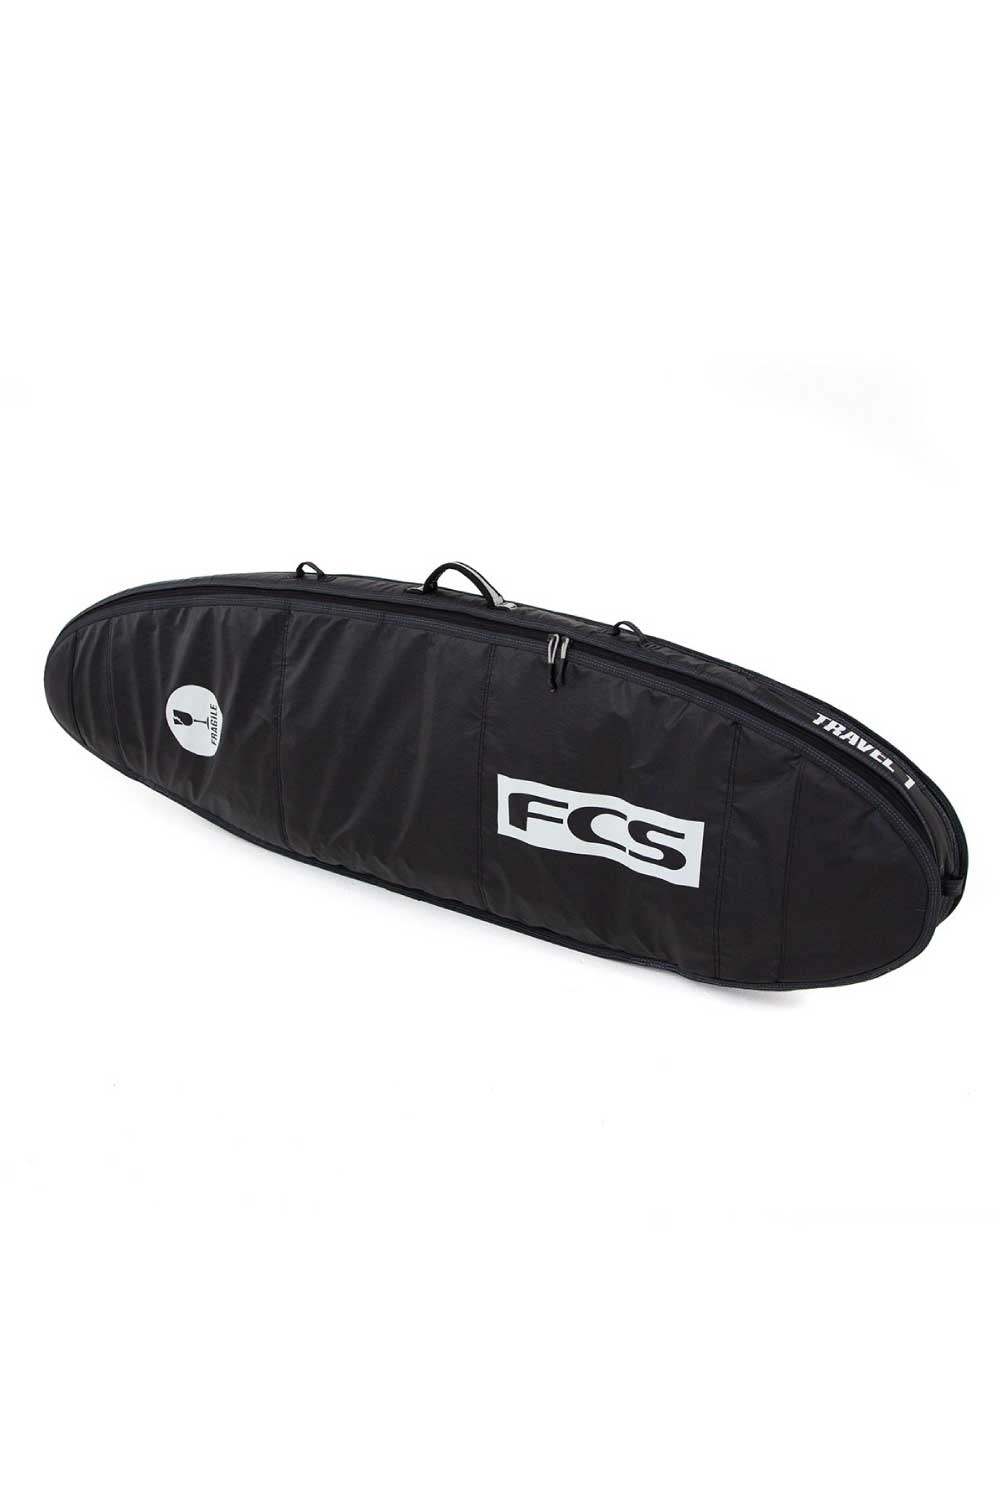 FCS Travel 1 Funboard Surfboard Cover